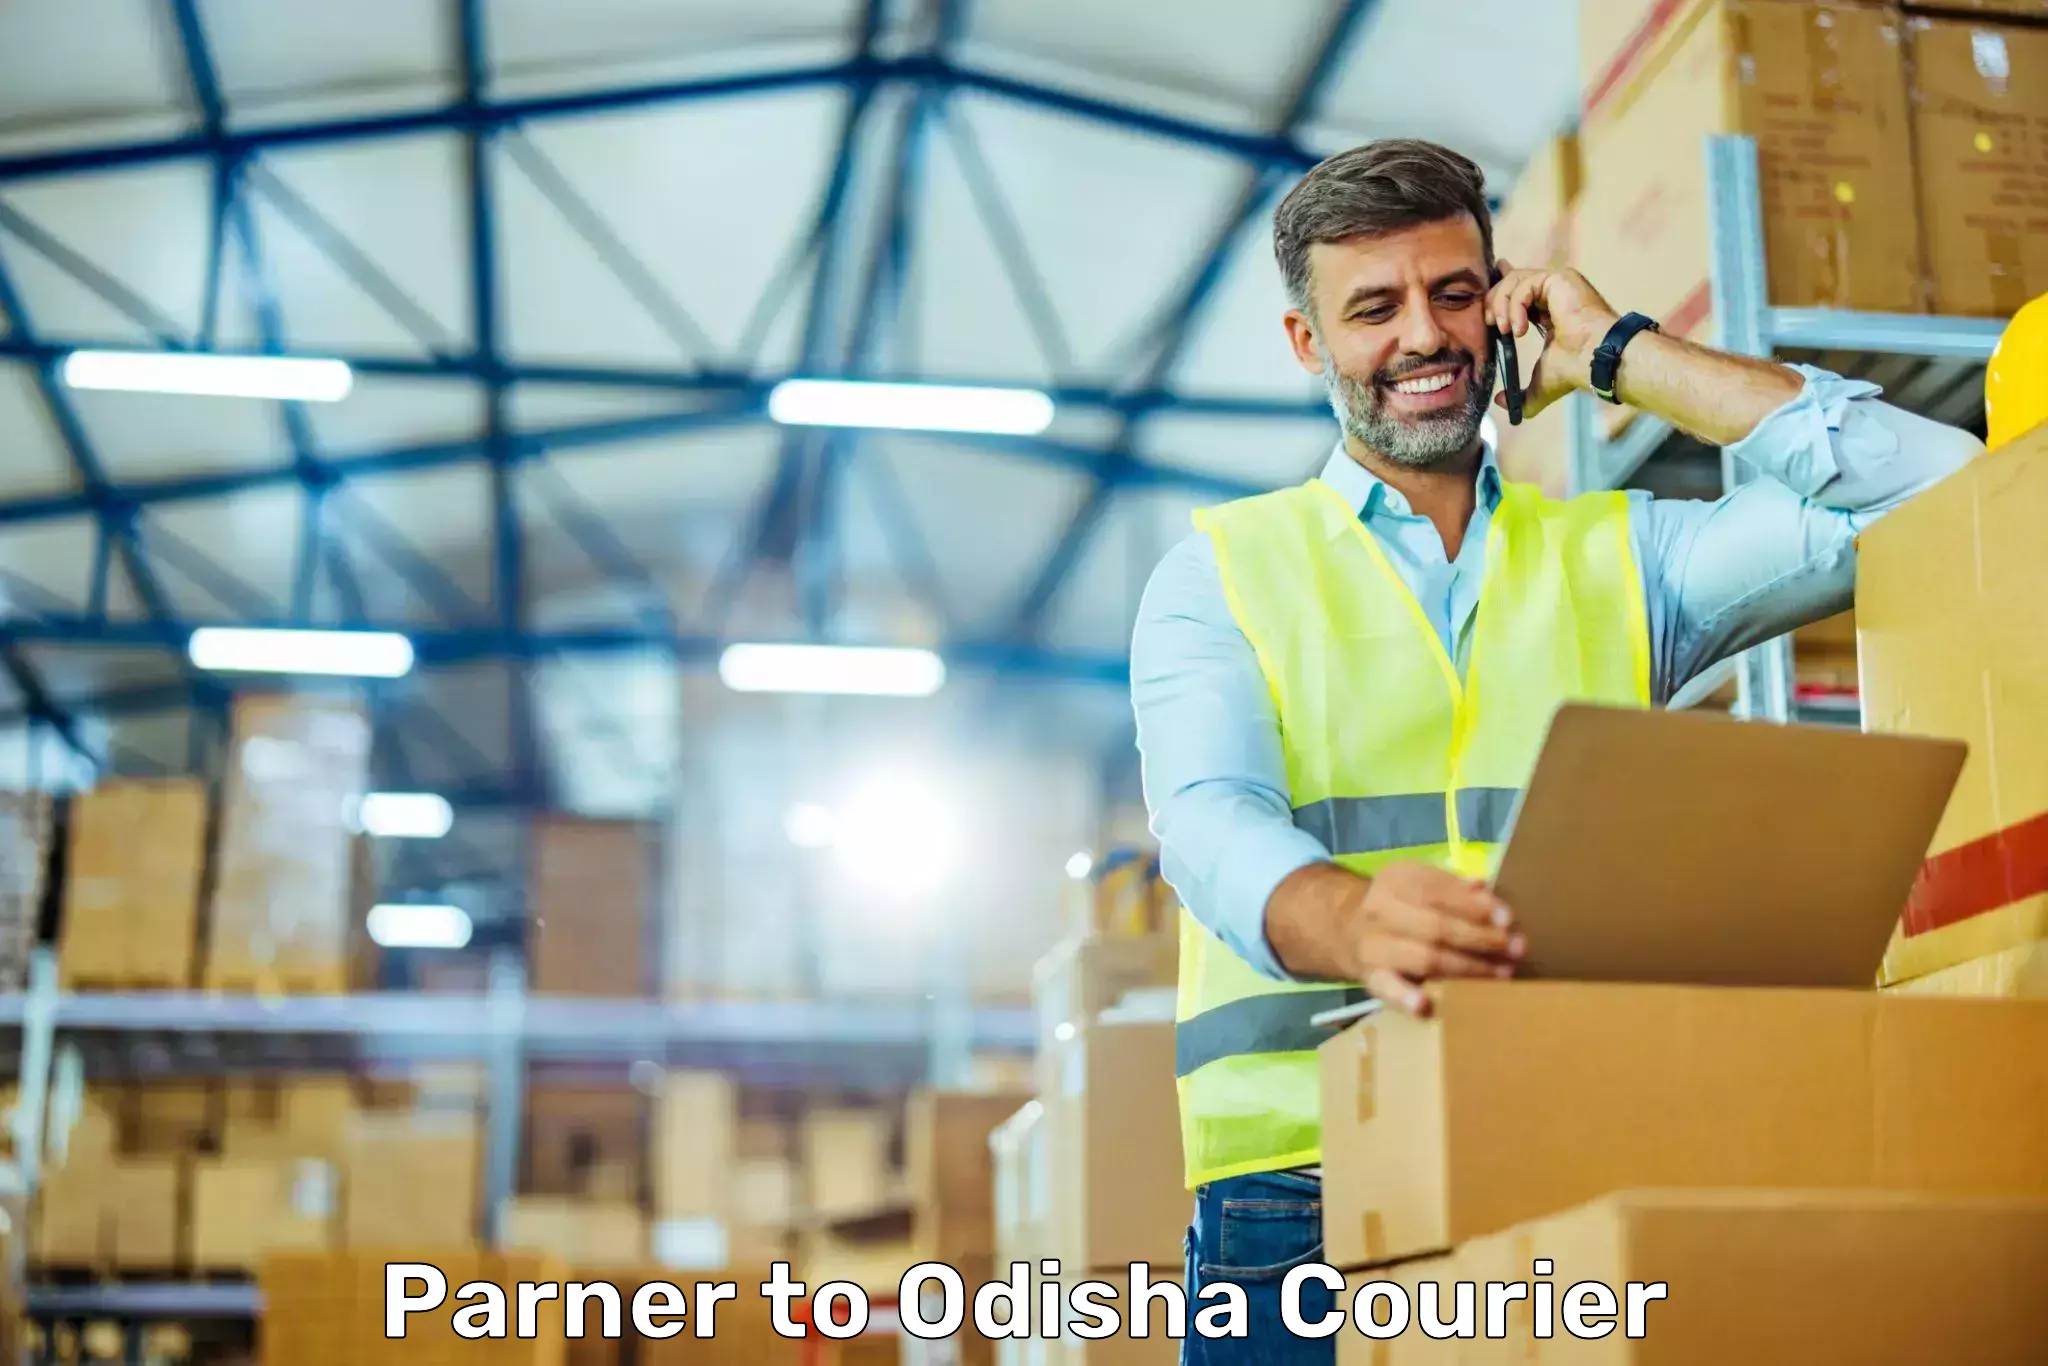 Reliable delivery network Parner to Odisha